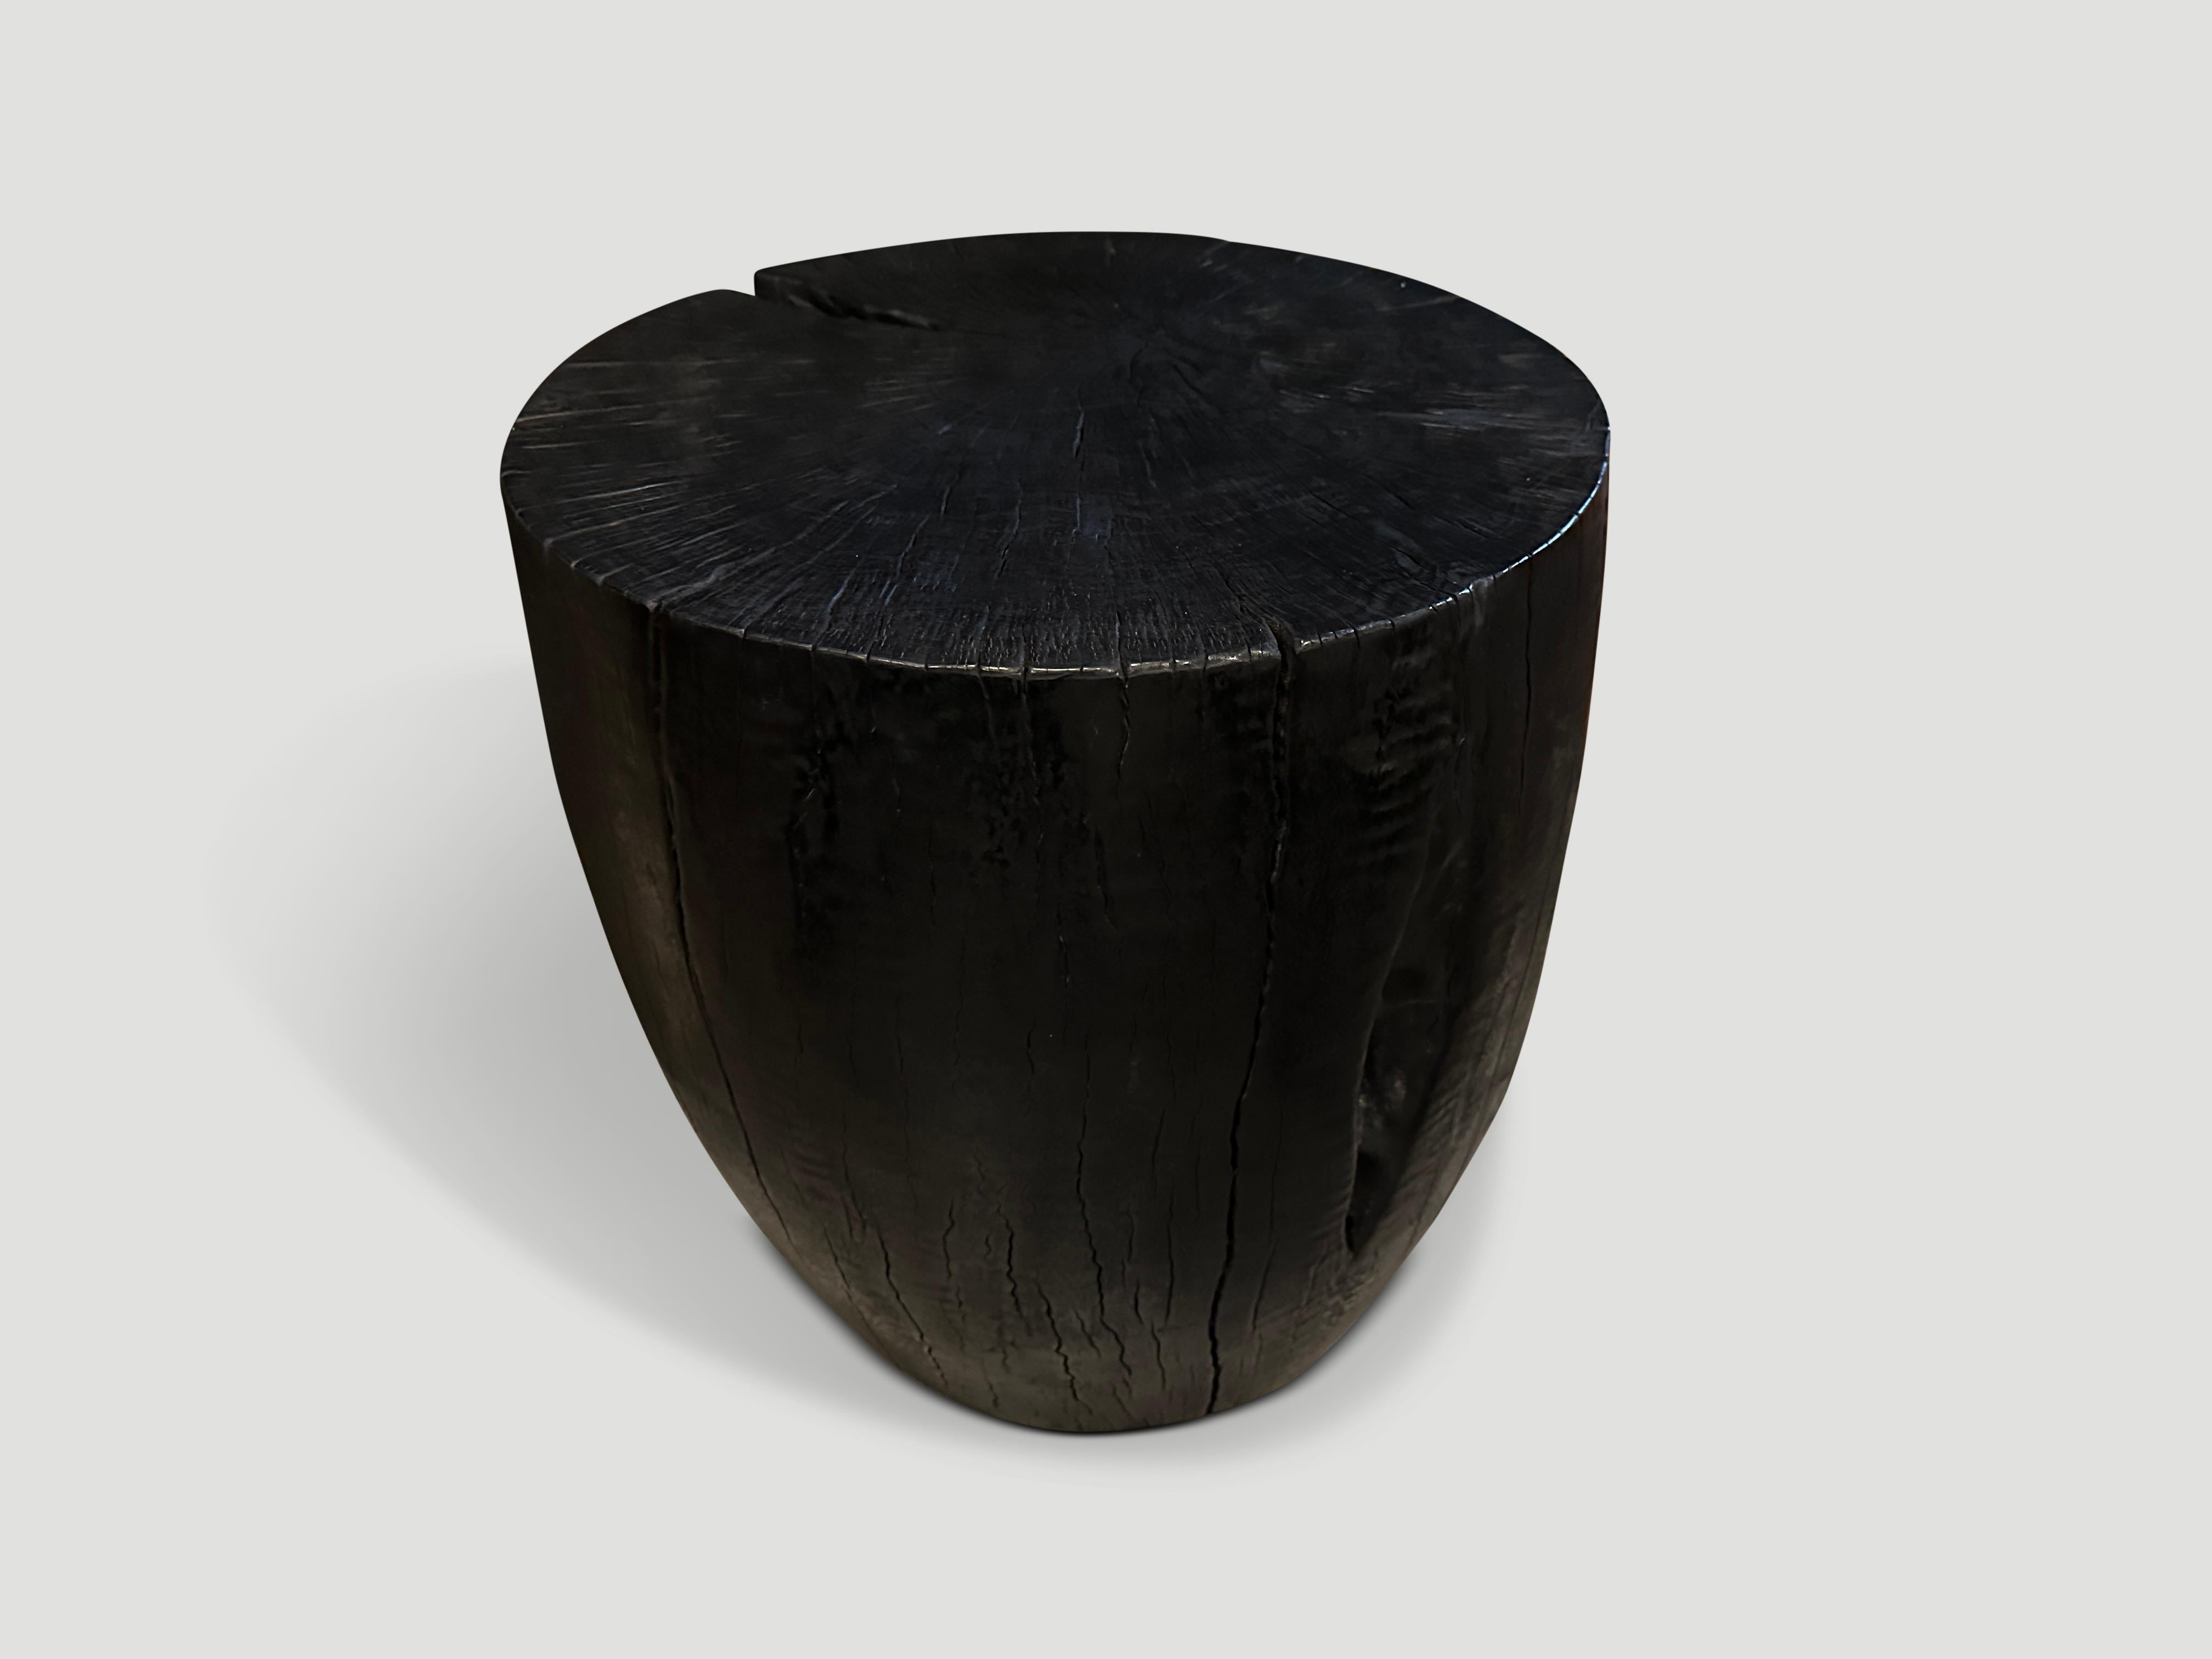 Reclaimed Mango wood hand carved into this stunning drum shape whilst respecting the natural organic wood. Burnt, sanded and sealed revealing the beautiful wood grain.

The Triple Burnt Collection represents a unique line of modern furniture made